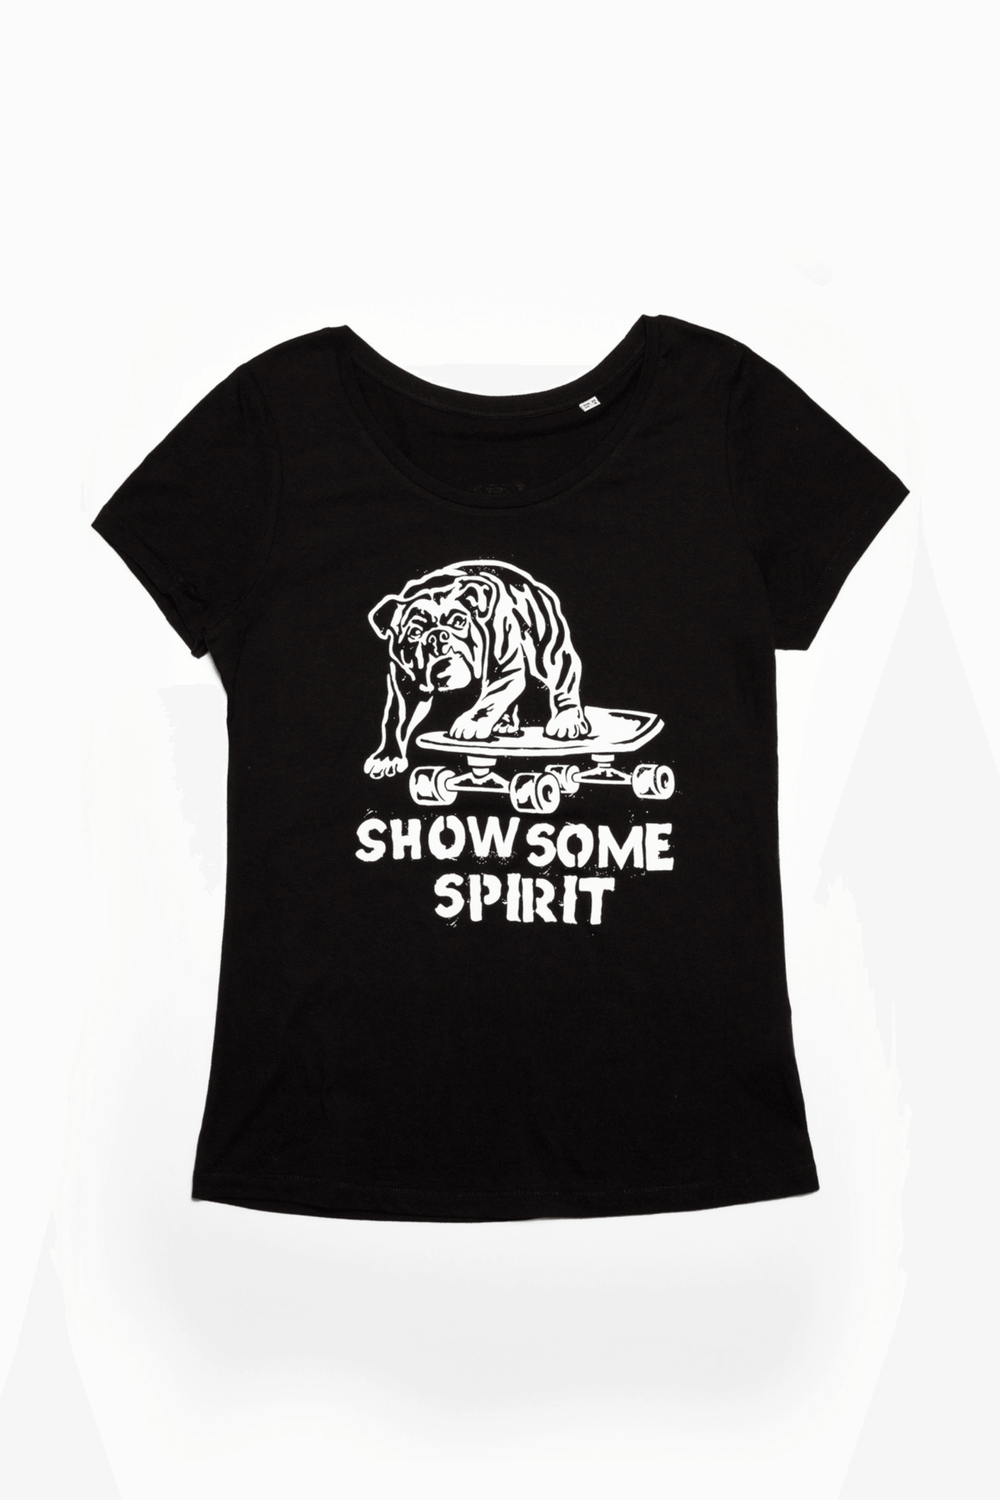 Doghouse T-Shirt - Ladies - Doghouse Distillery